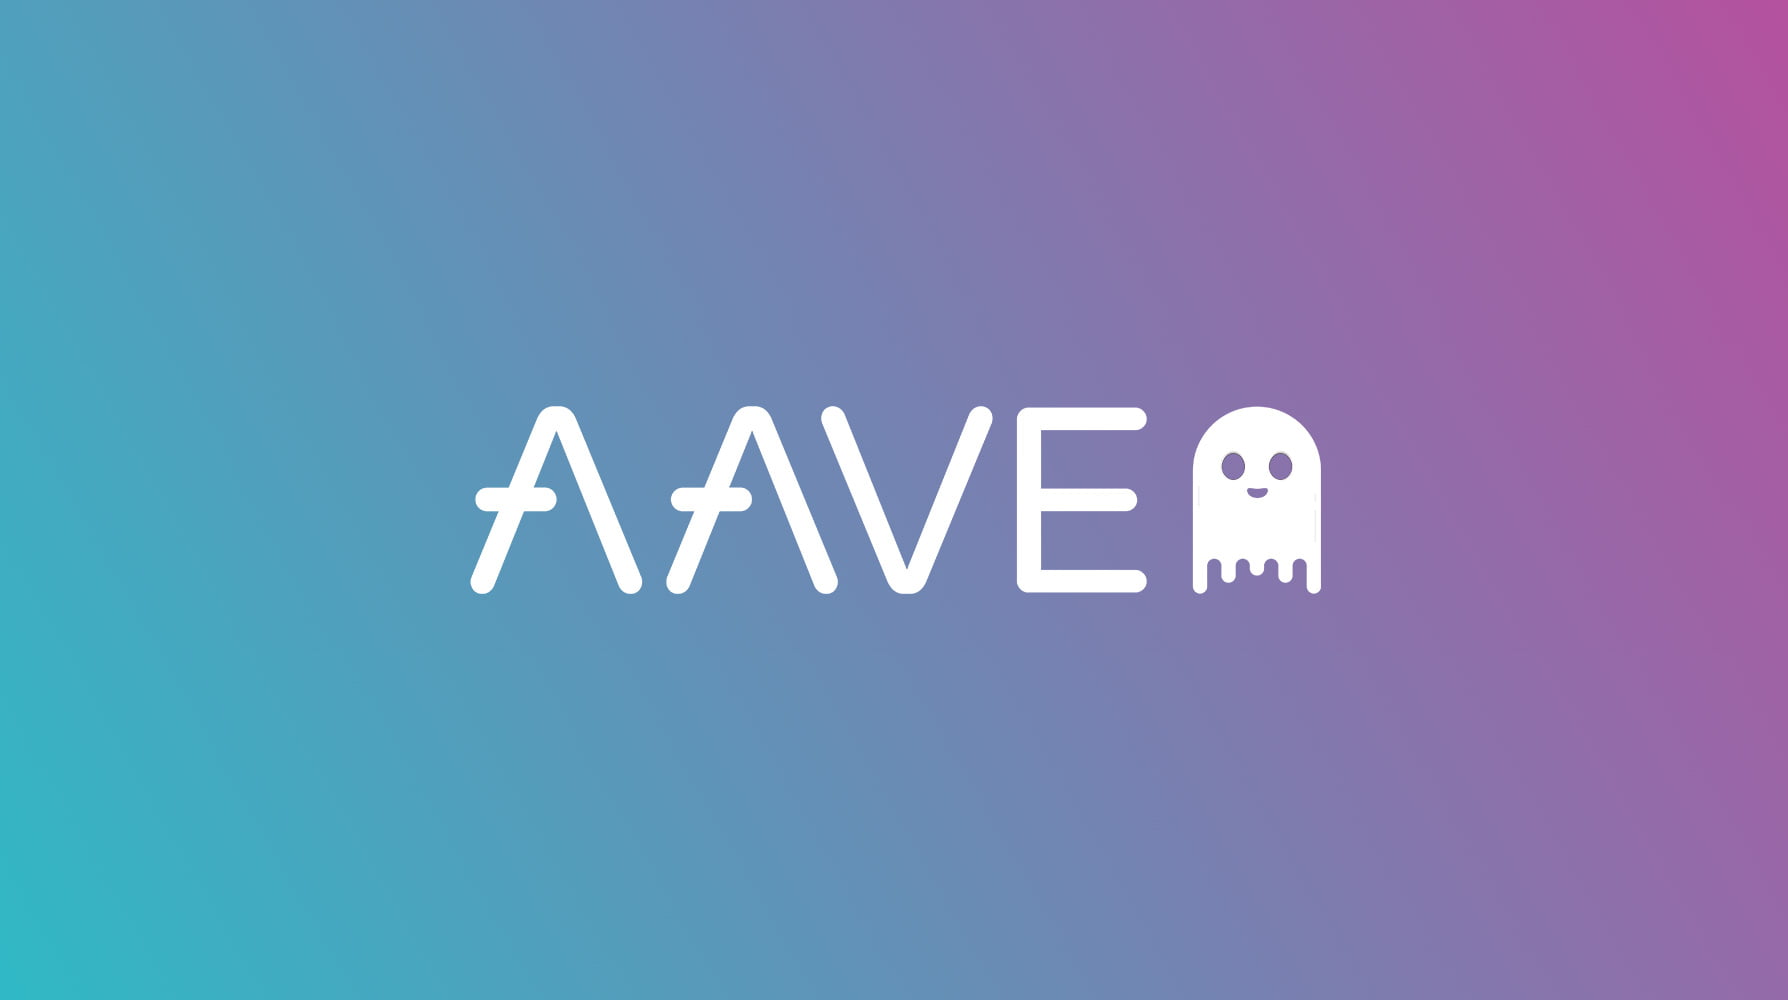 Aave - 5 important tokens on Ethereum Blockchain